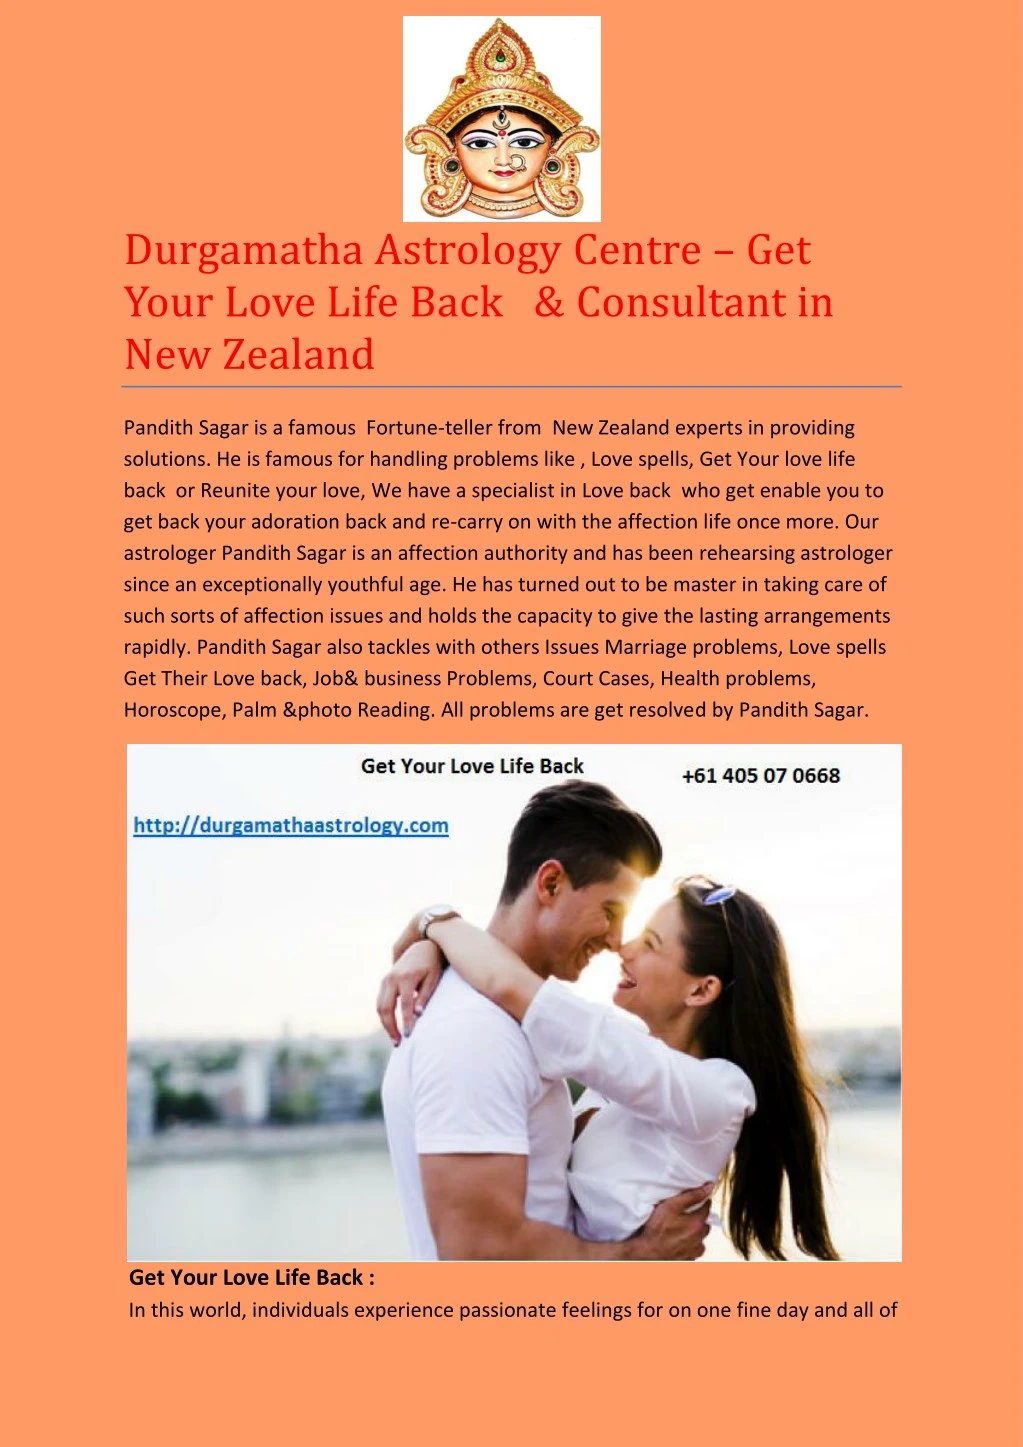 durgamatha astrology centre get your love life